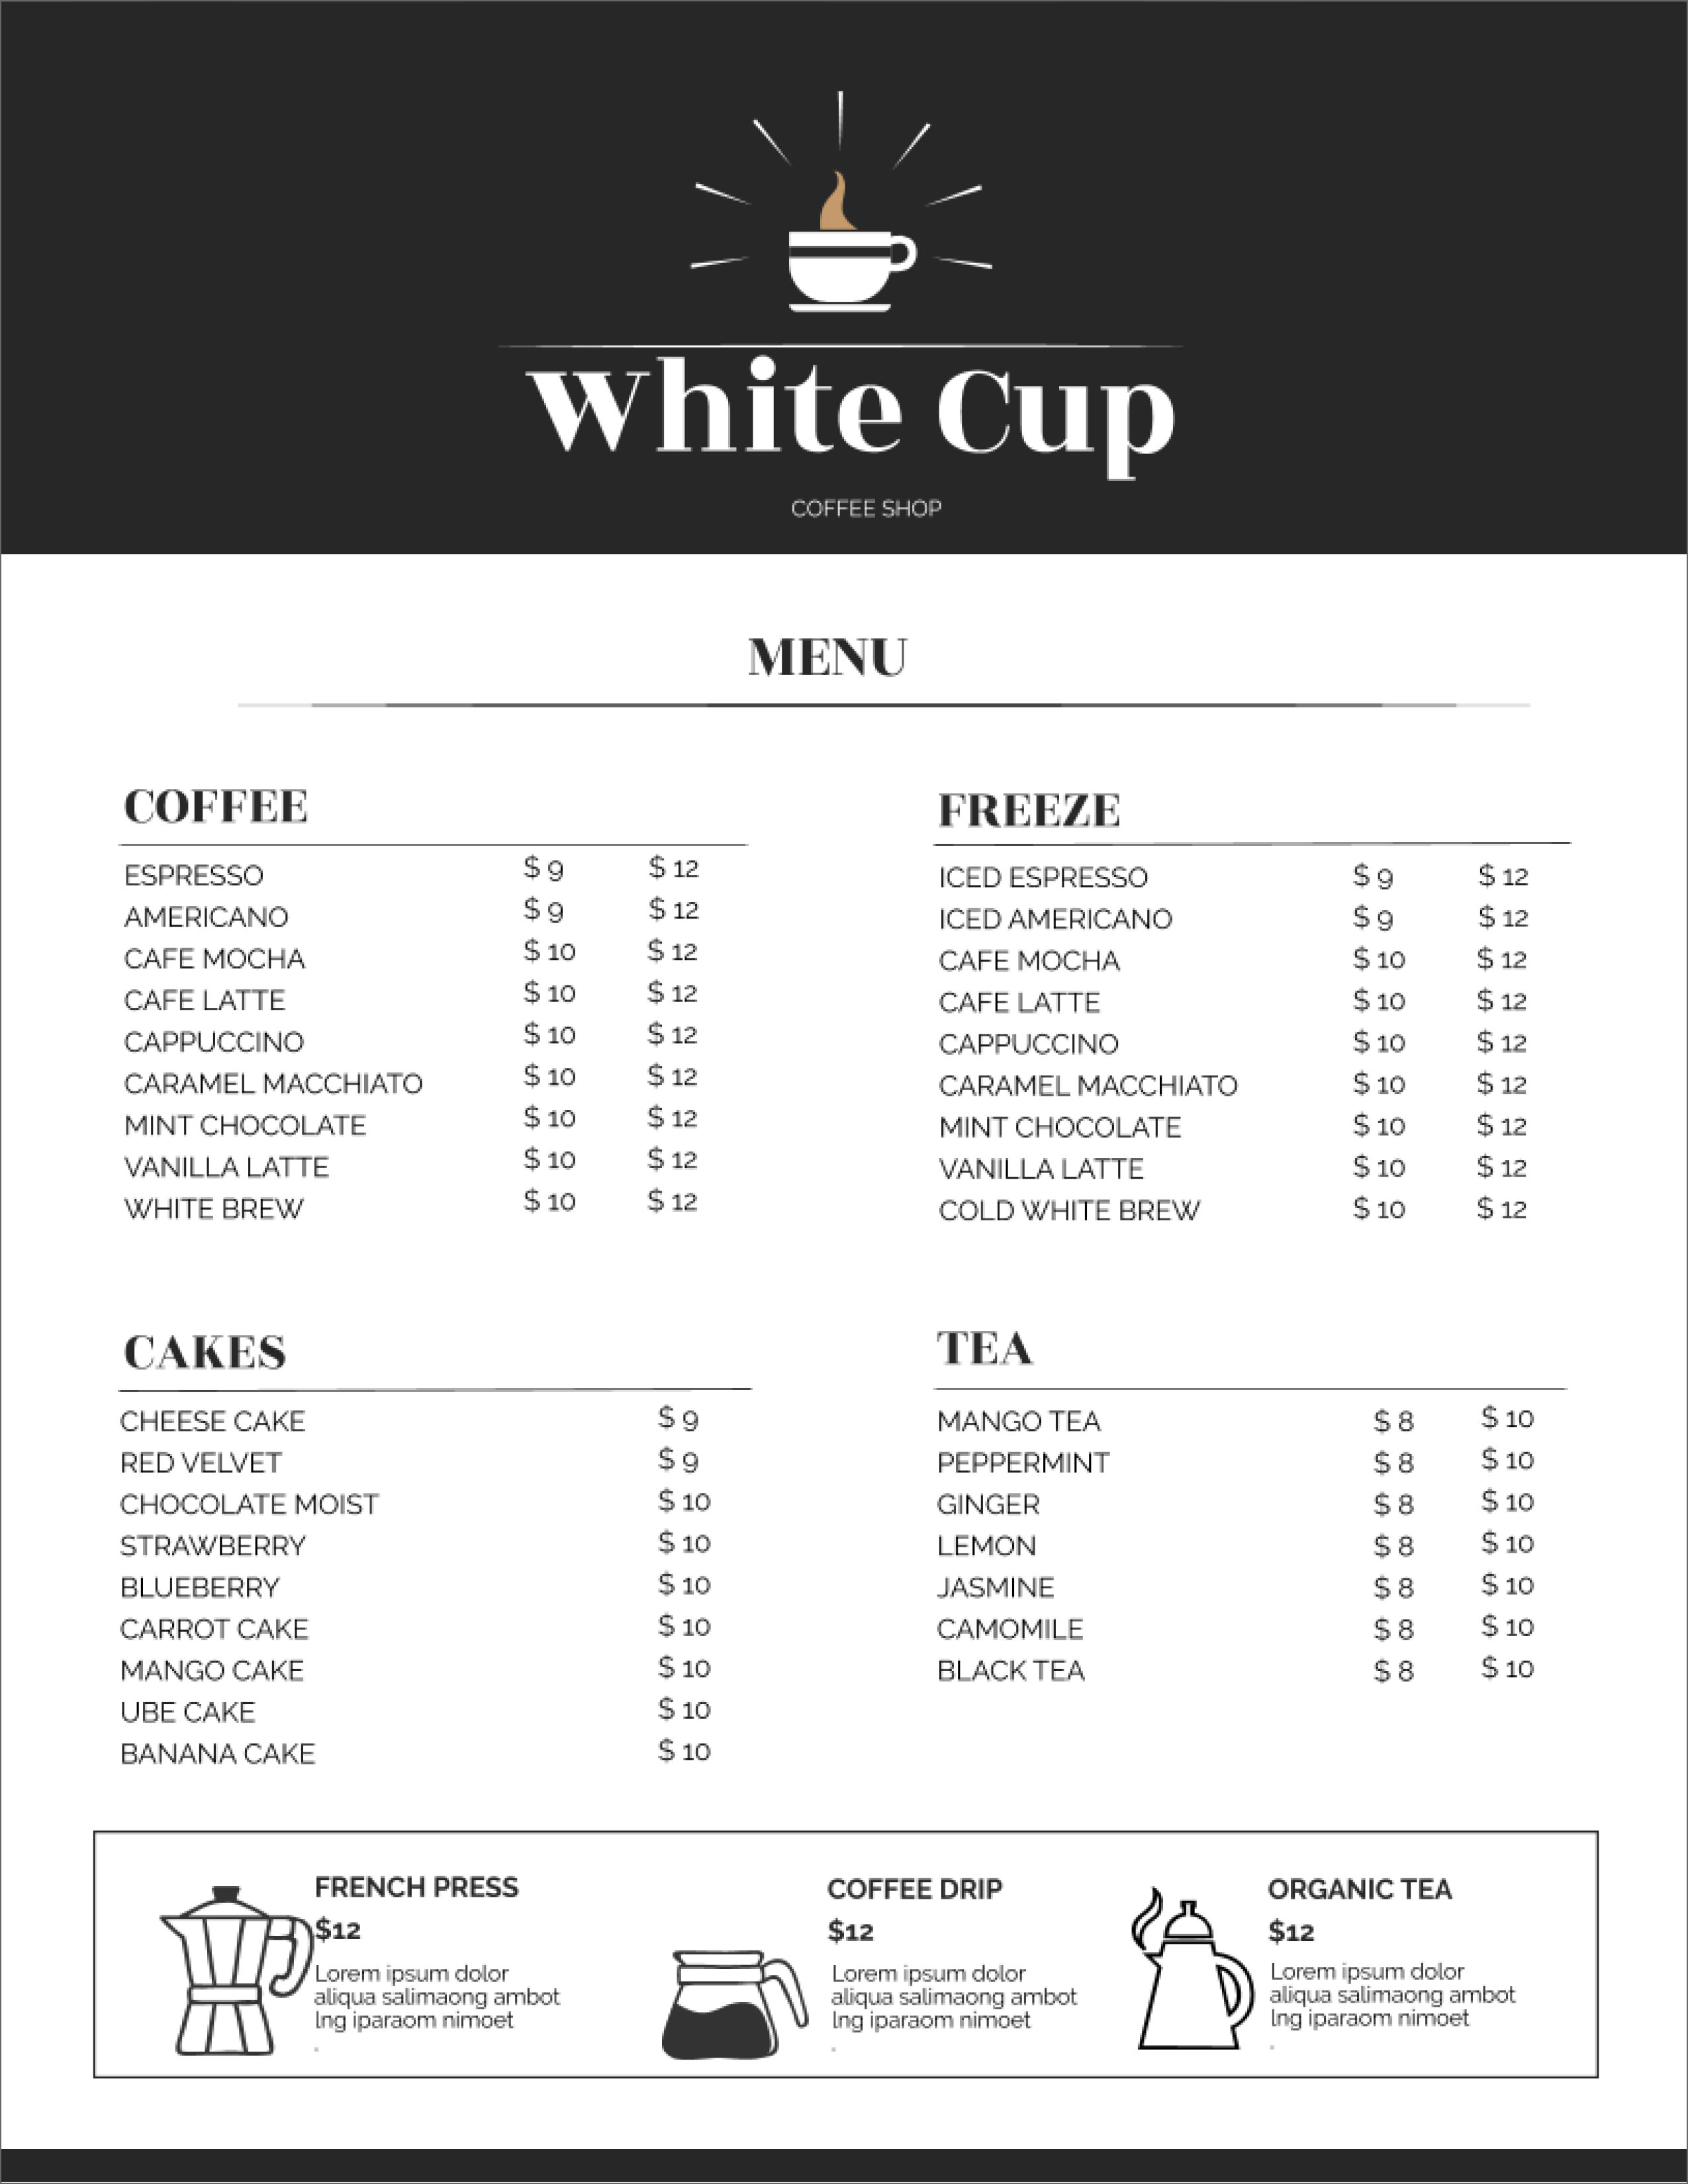 32 Free Simple Menu Templates For Restaurants Cafes And Parties